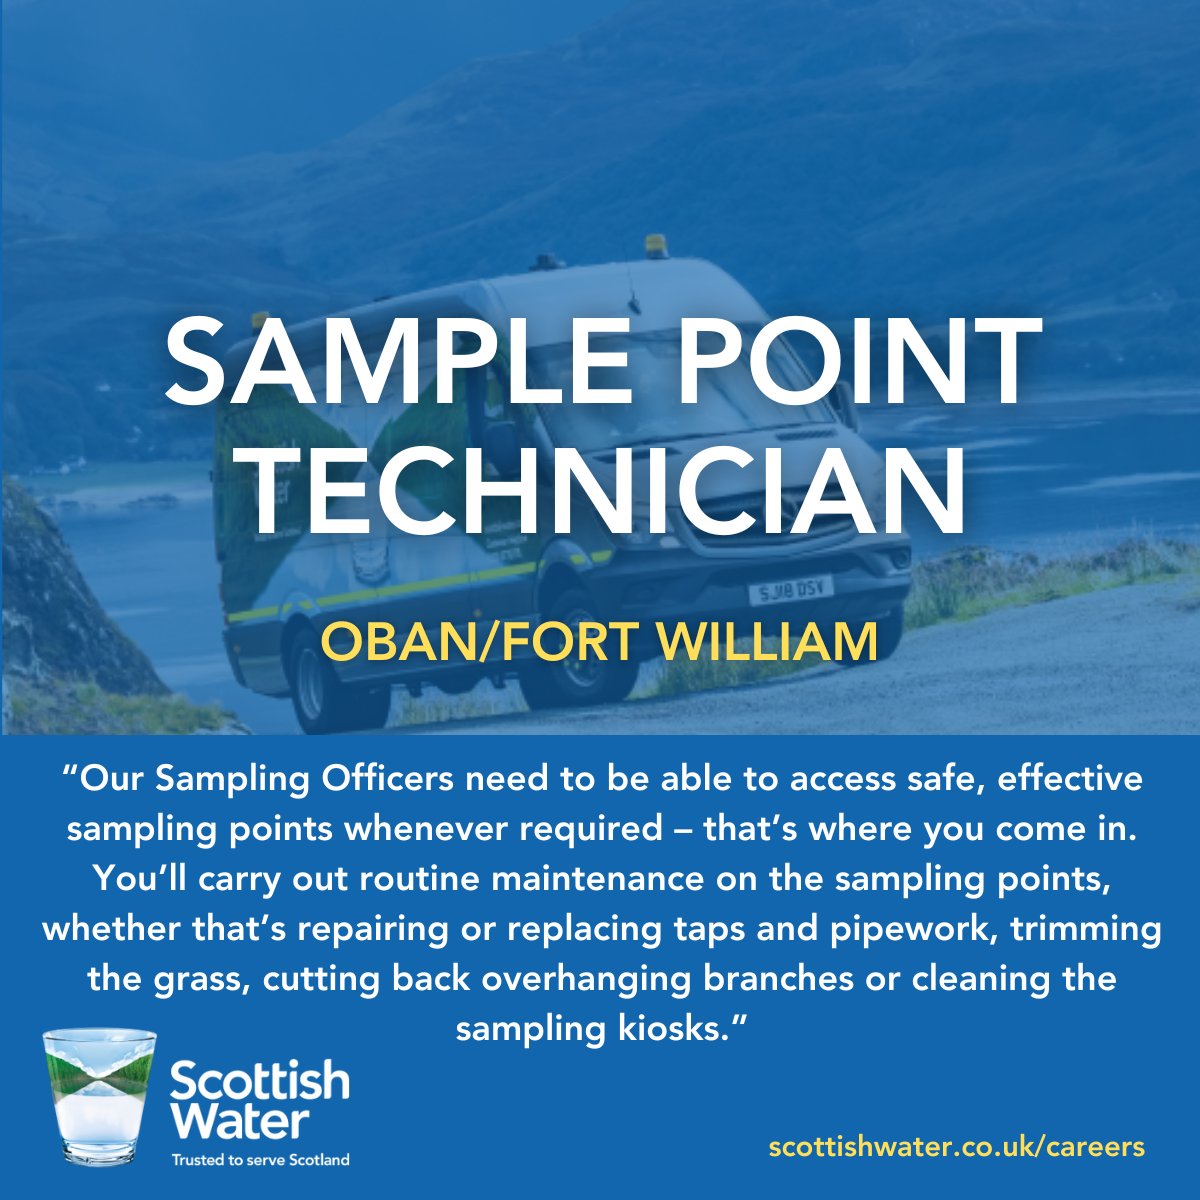 Calling all plumbers - fancy a career change? As a Sample Point Technician, you'll maintain sampling points, ensuring public health and environmental protection, and beyond, all while driving towards team goals and embracing new technologies. bit.ly/3W3dy1j #WaterQuality